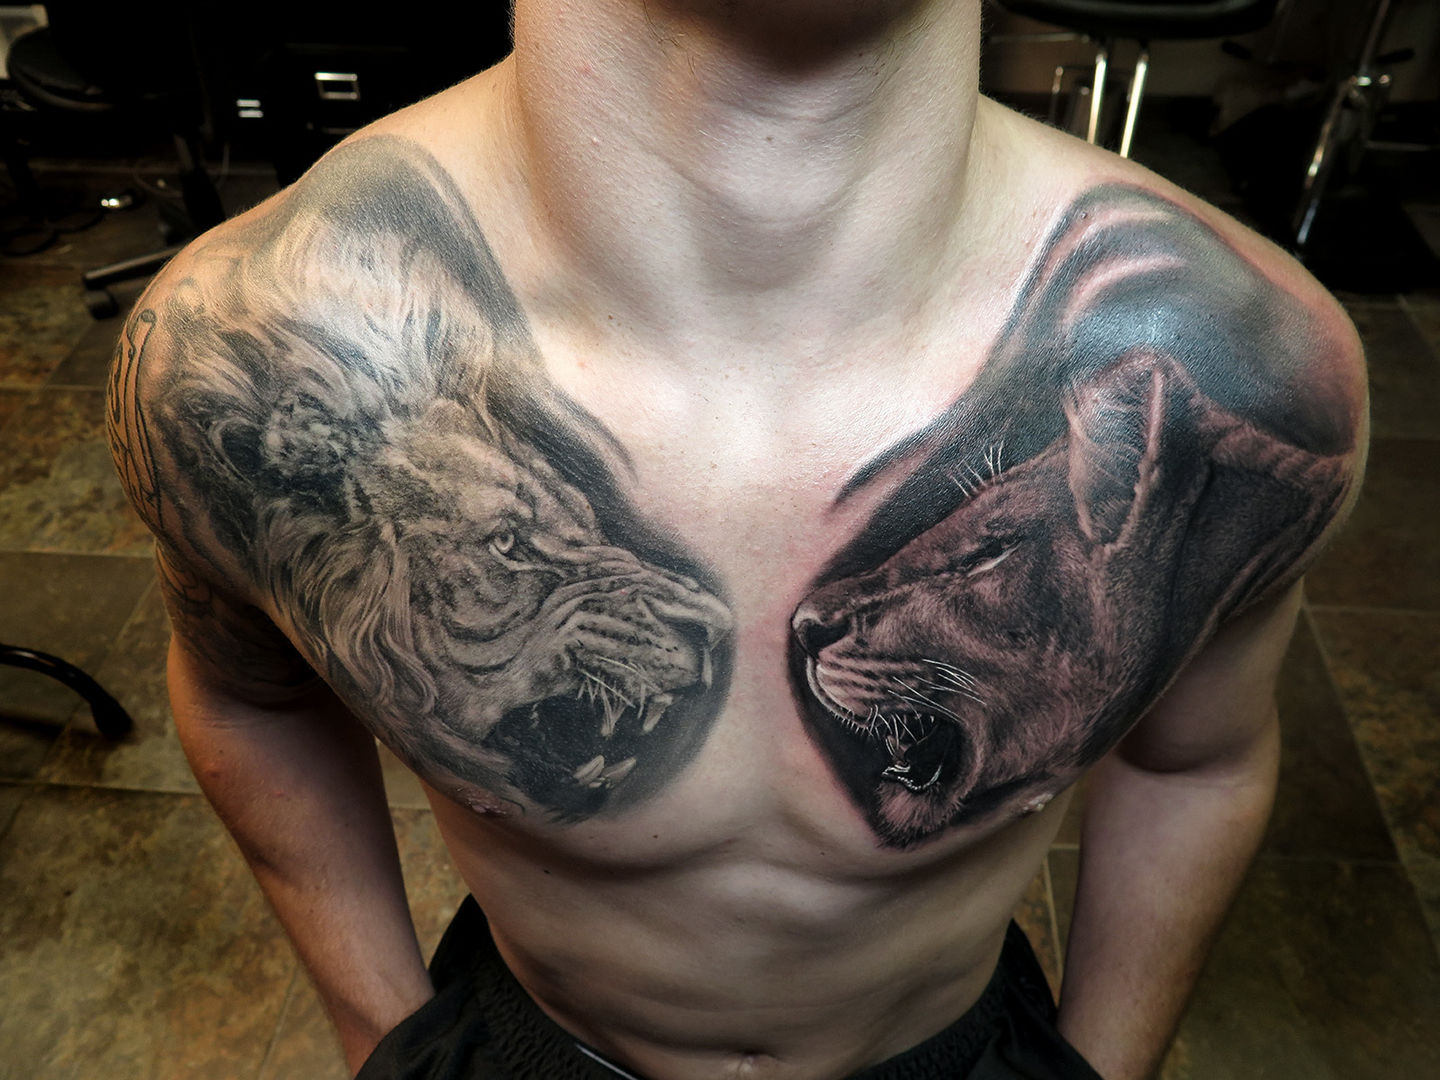 30 Best Chest Tattoo Ideas You Should Check